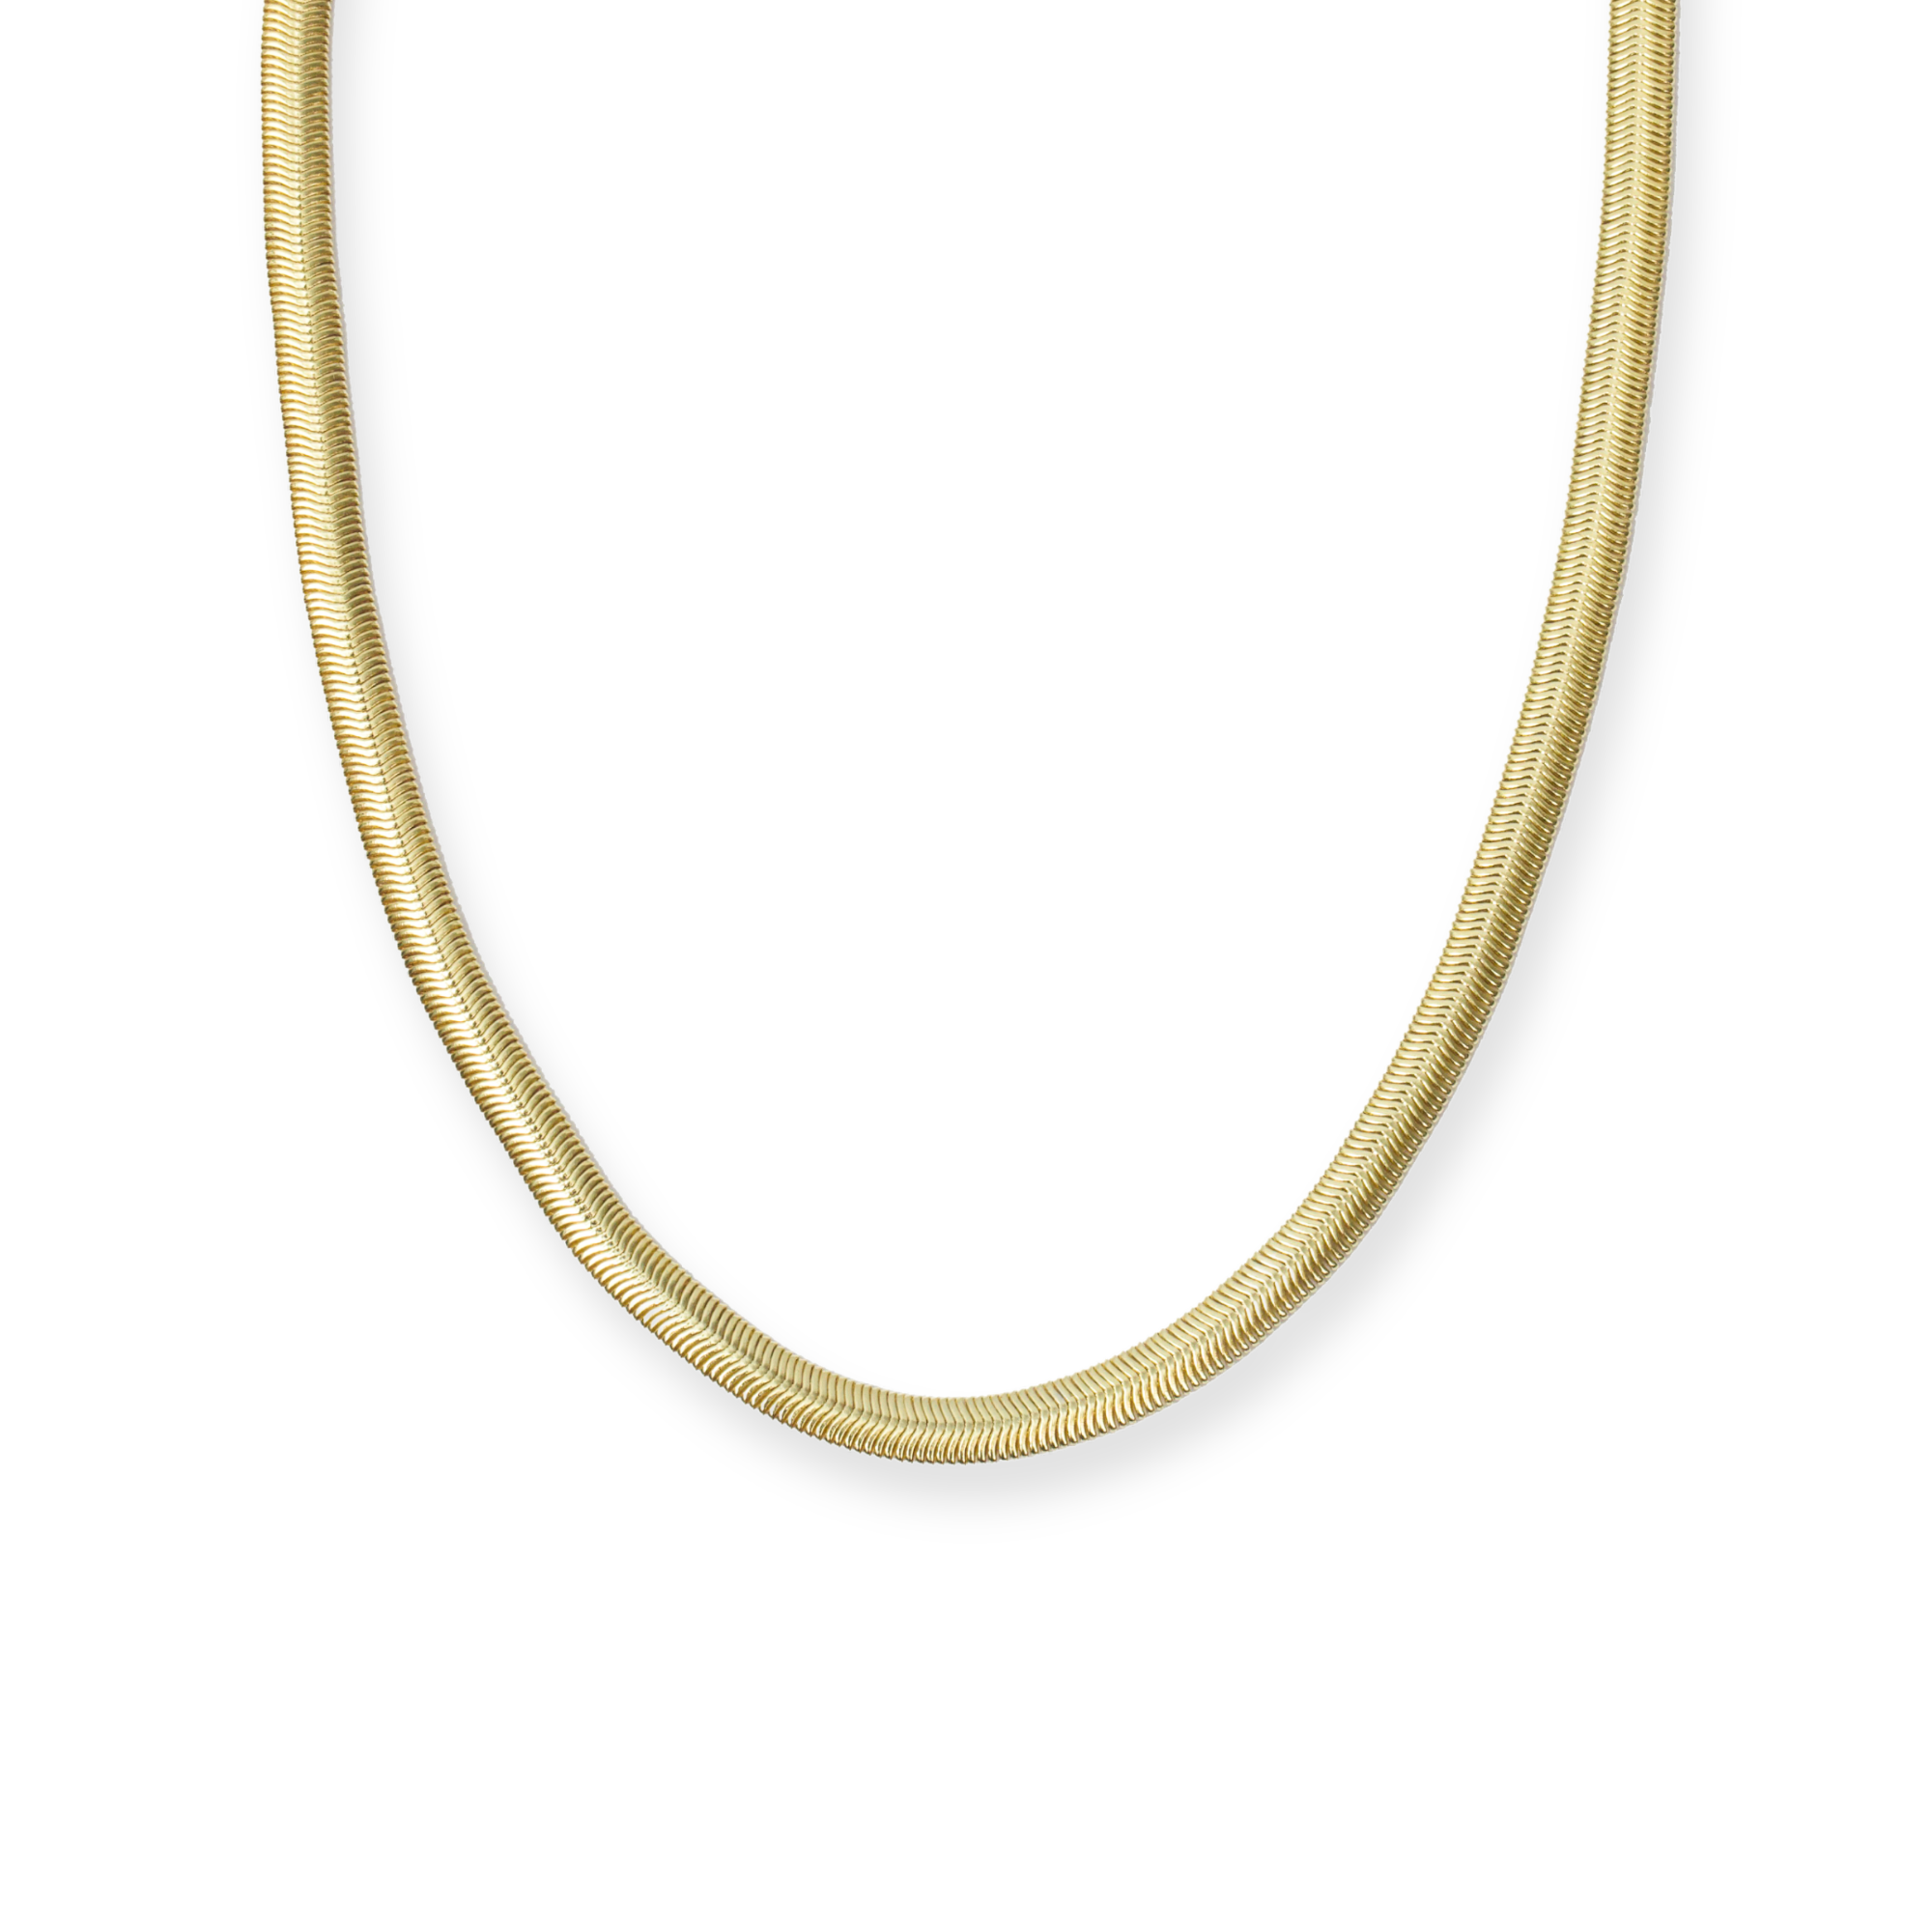 THE THIN ELOISE NECKLACE